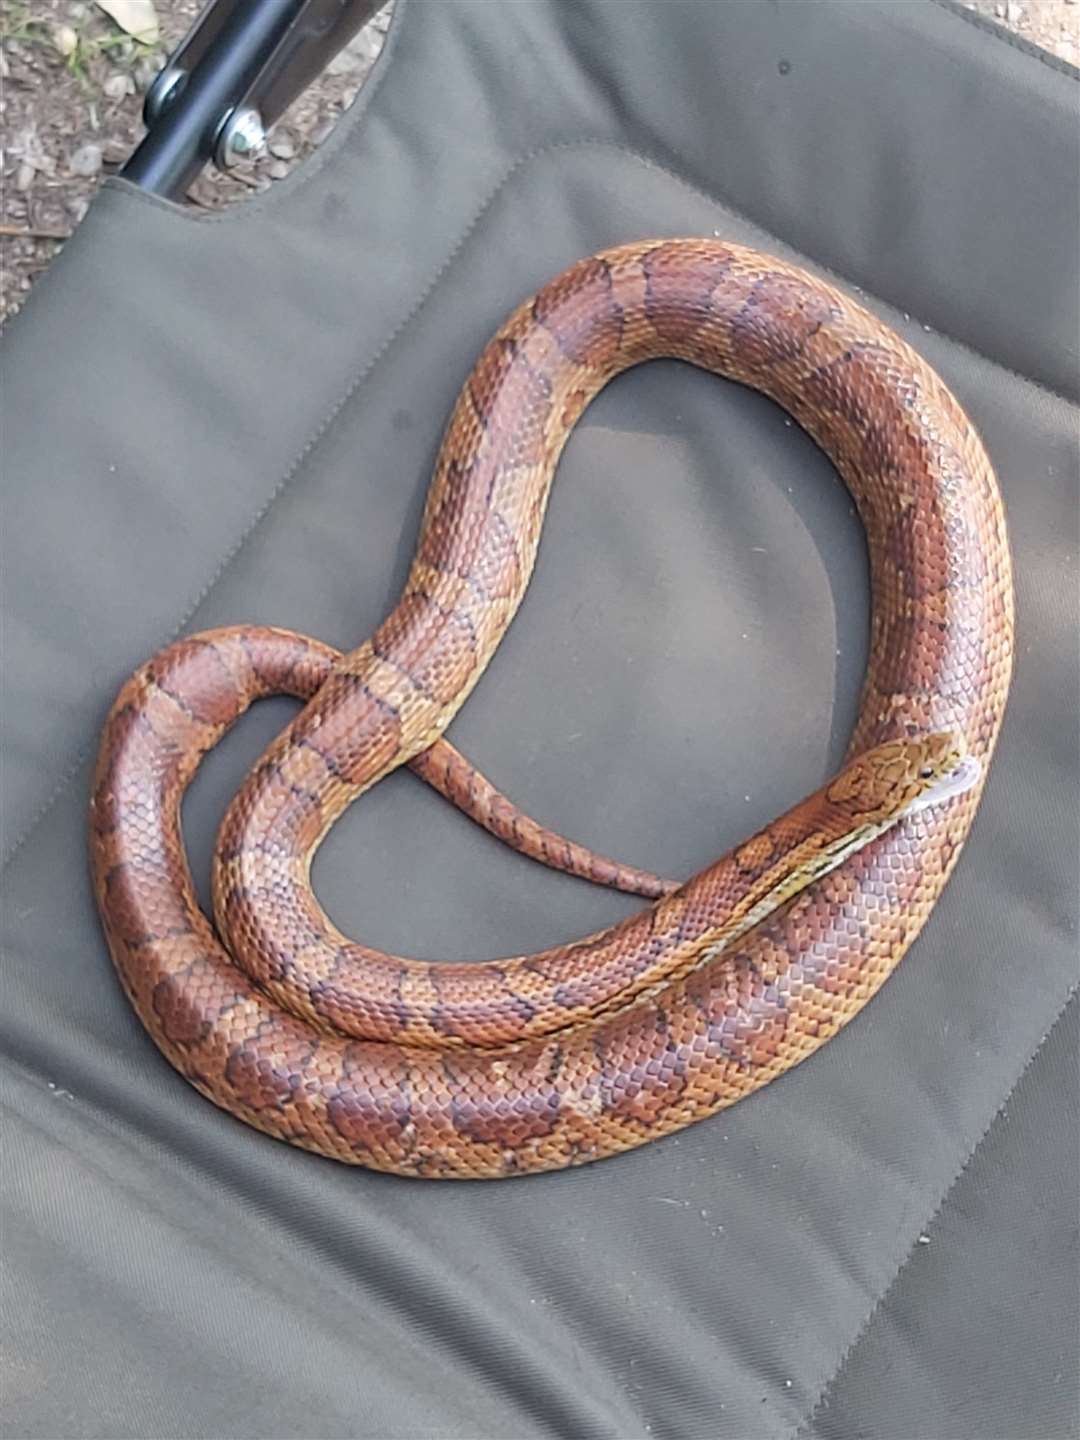 A snake was discovered in Brooklands Lake, Dartford. Photo: Kent Police